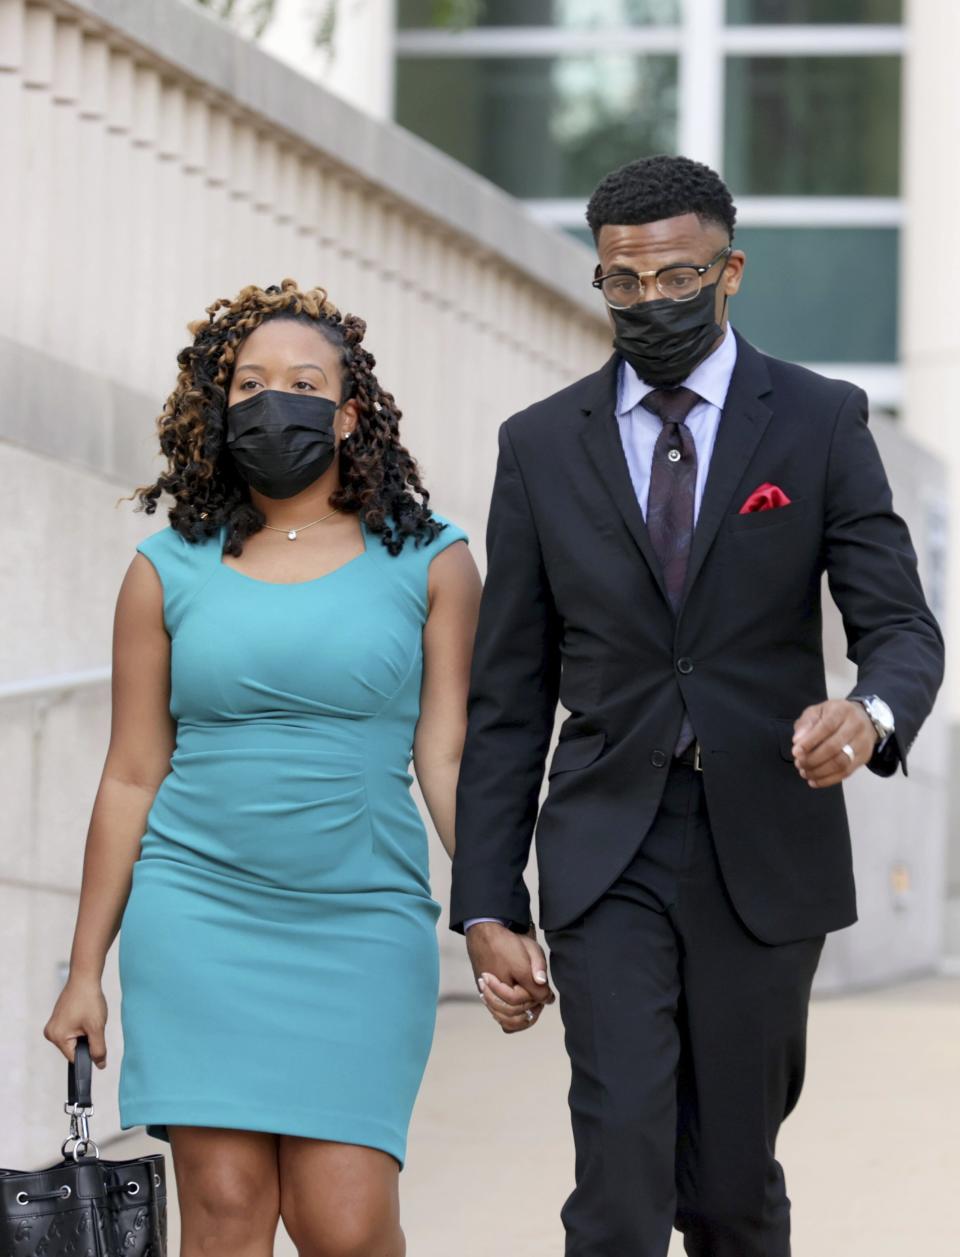 Former St. Louis Alderman John Collins-Muhammad leaves the Thomas Eagleton Federal Courthouse with his wife, Asia Collins-Muhammad, on Tuesday, Aug. 23, 2022, after pleading guilty in a federal corruption case, in St. Louis. (Christian Gooden/St. Louis Post-Dispatch via AP)